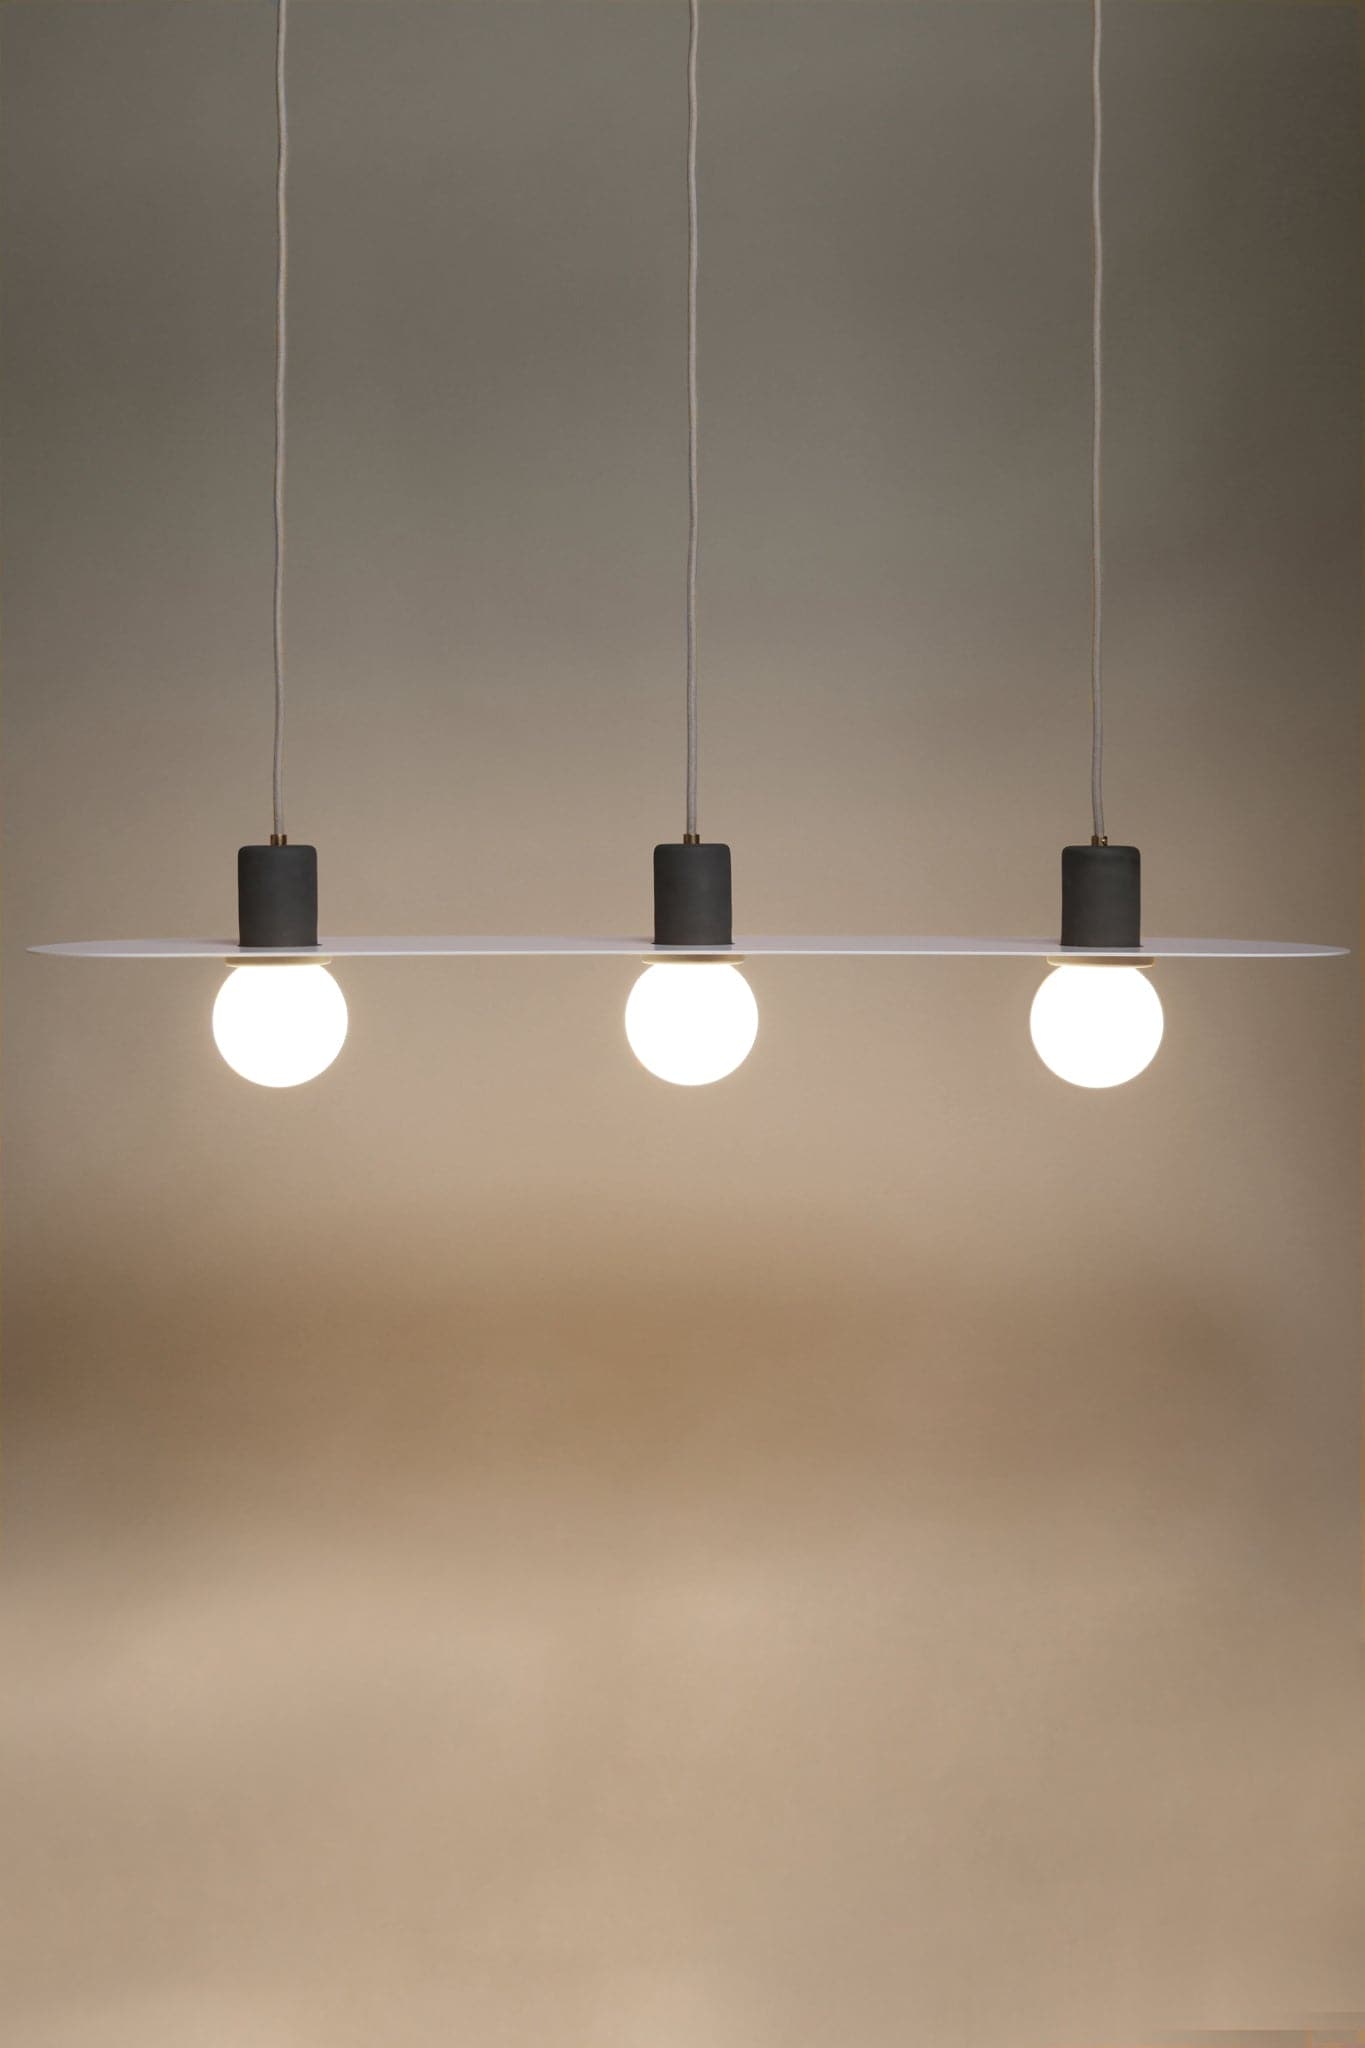 Marz Designs Feature Lighting - Lune Pendant Light in Slate/Brushed Brass with the light on.